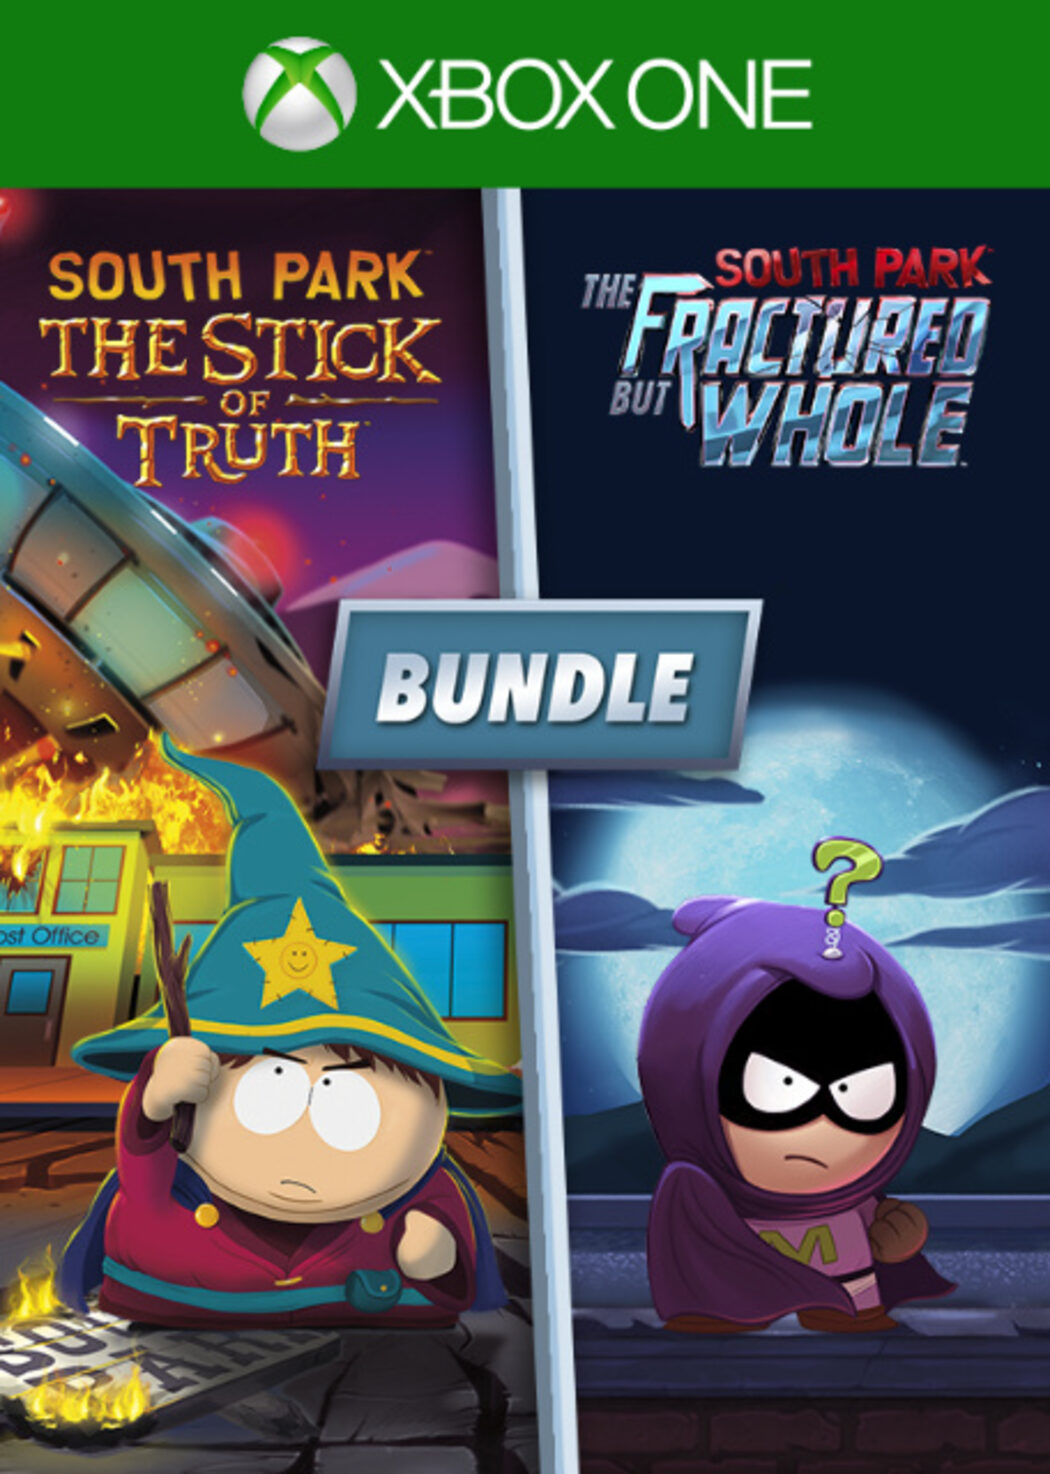 South park the fractured but whole купить ключ steam дешево фото 8